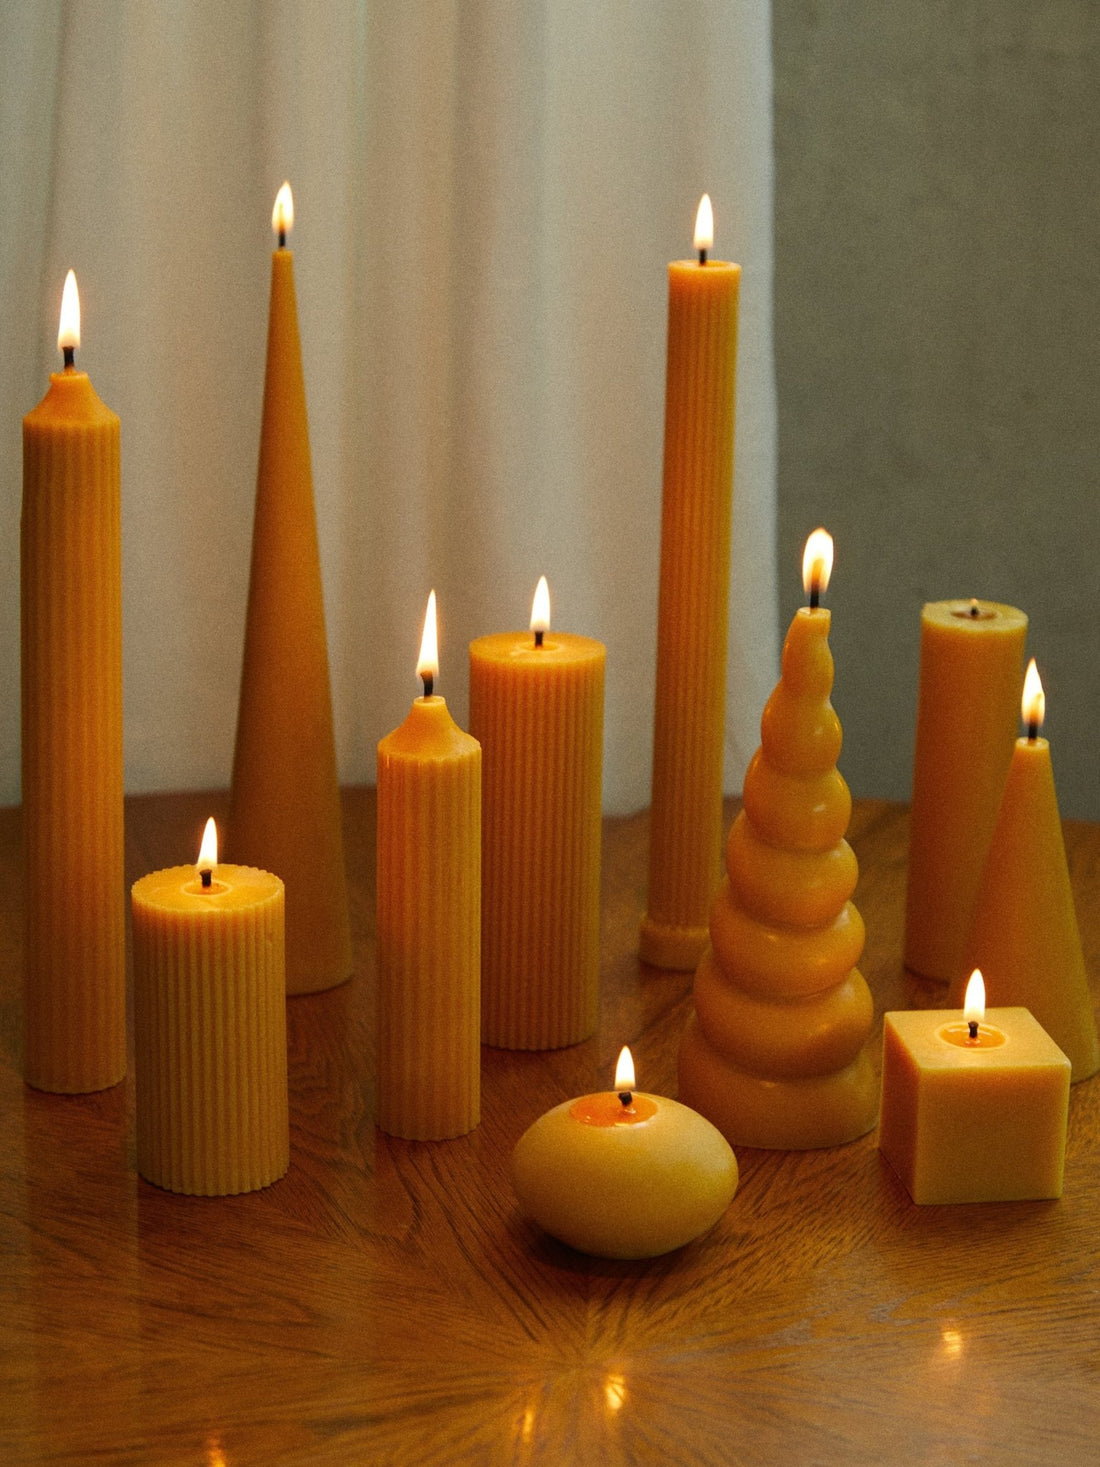 How to Price Beeswax Candles: A Guide for Small Businesses - BZZWAX